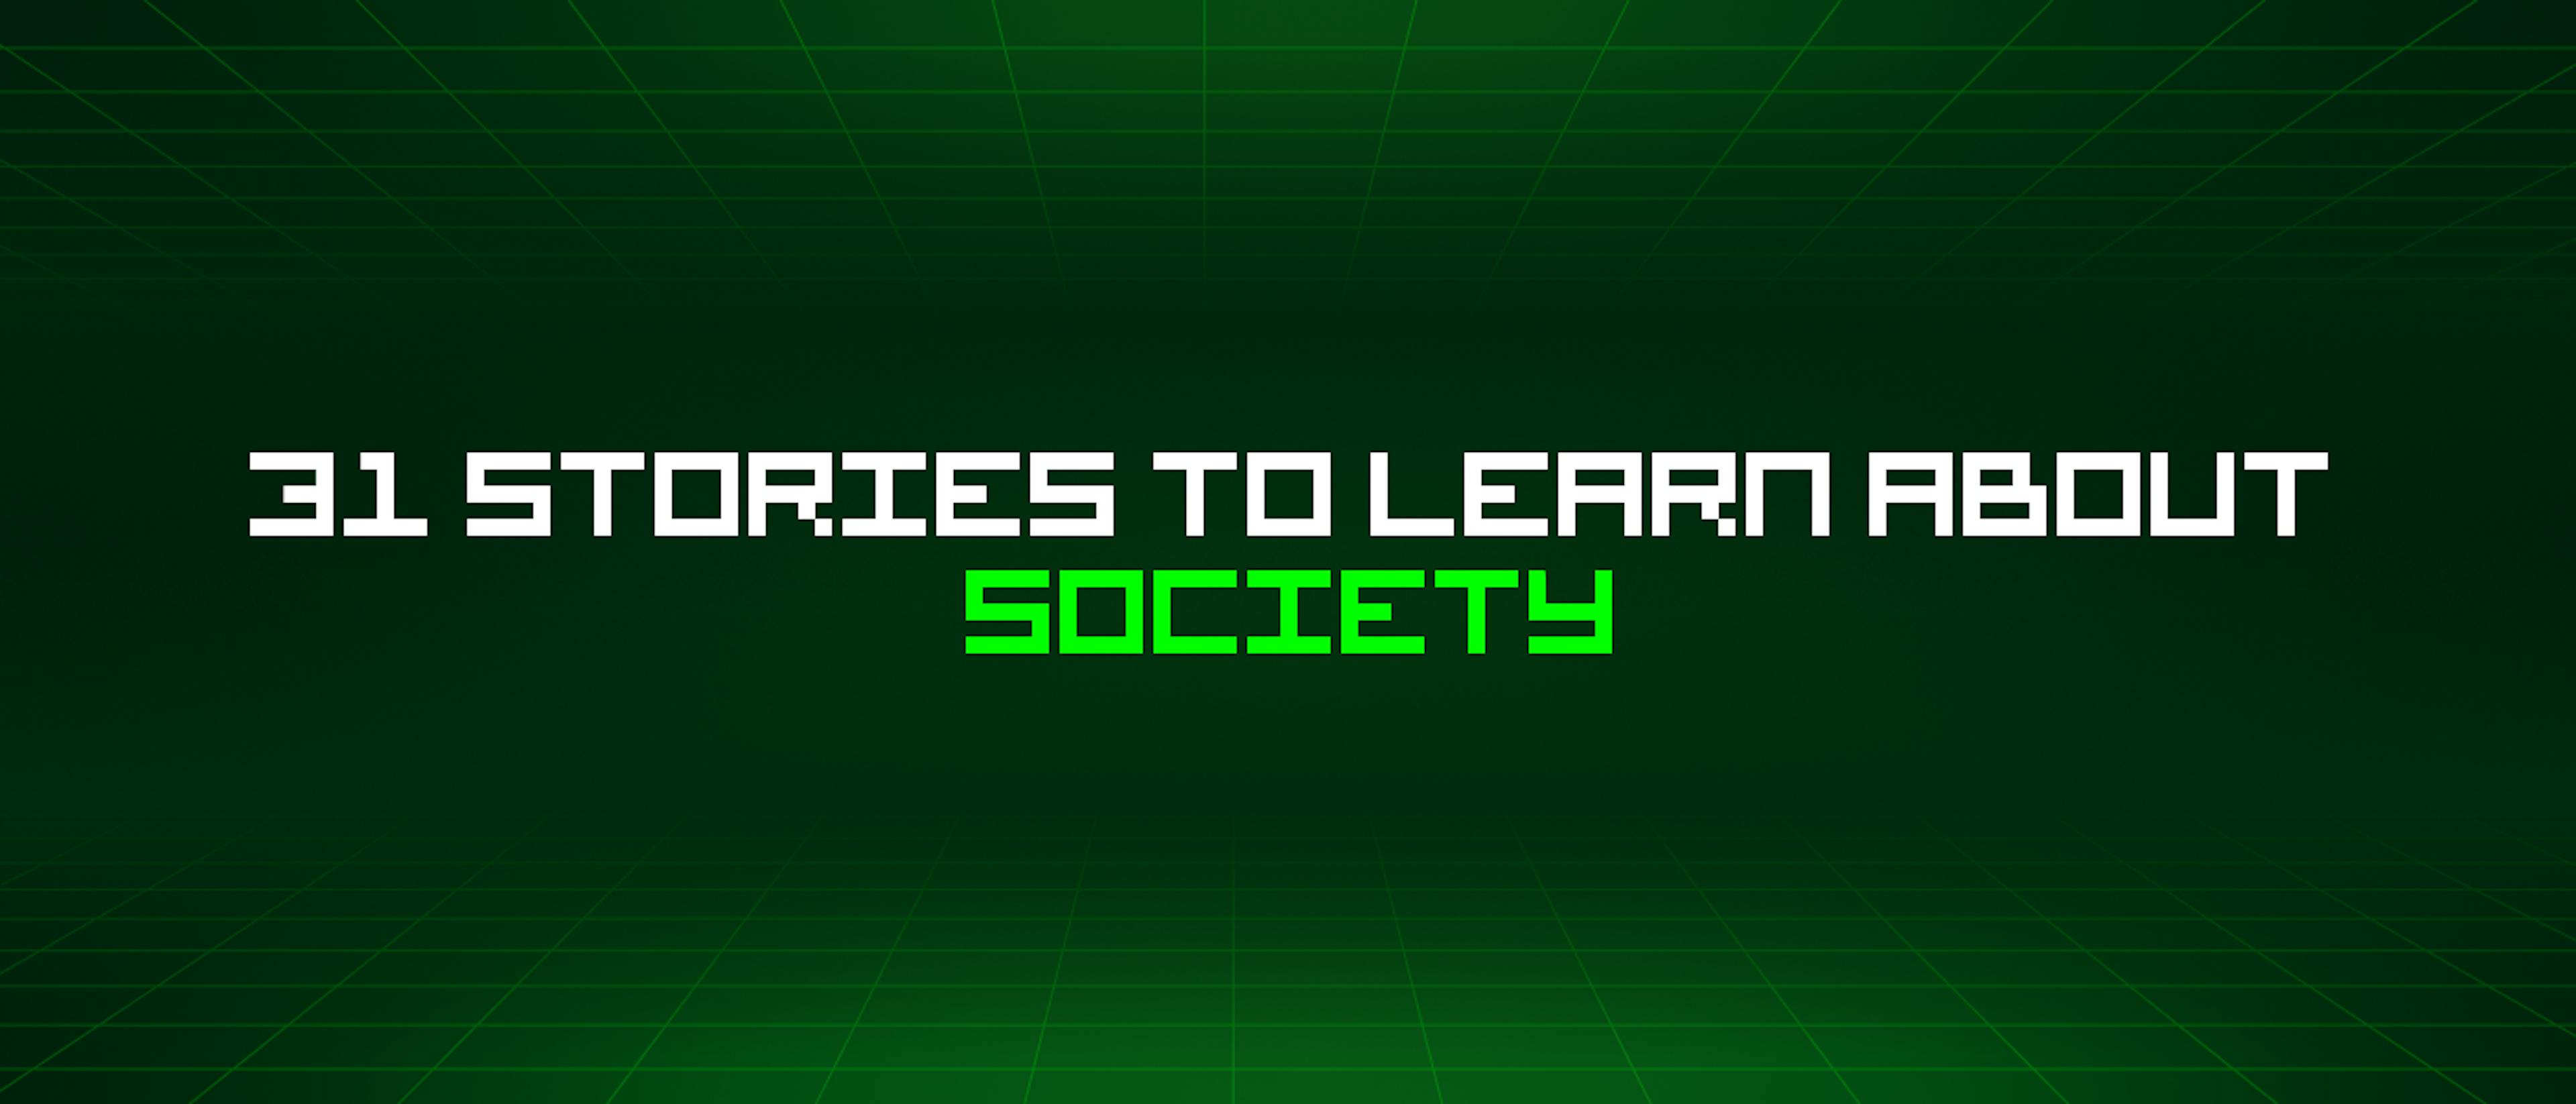 featured image - 31 Stories To Learn About Society